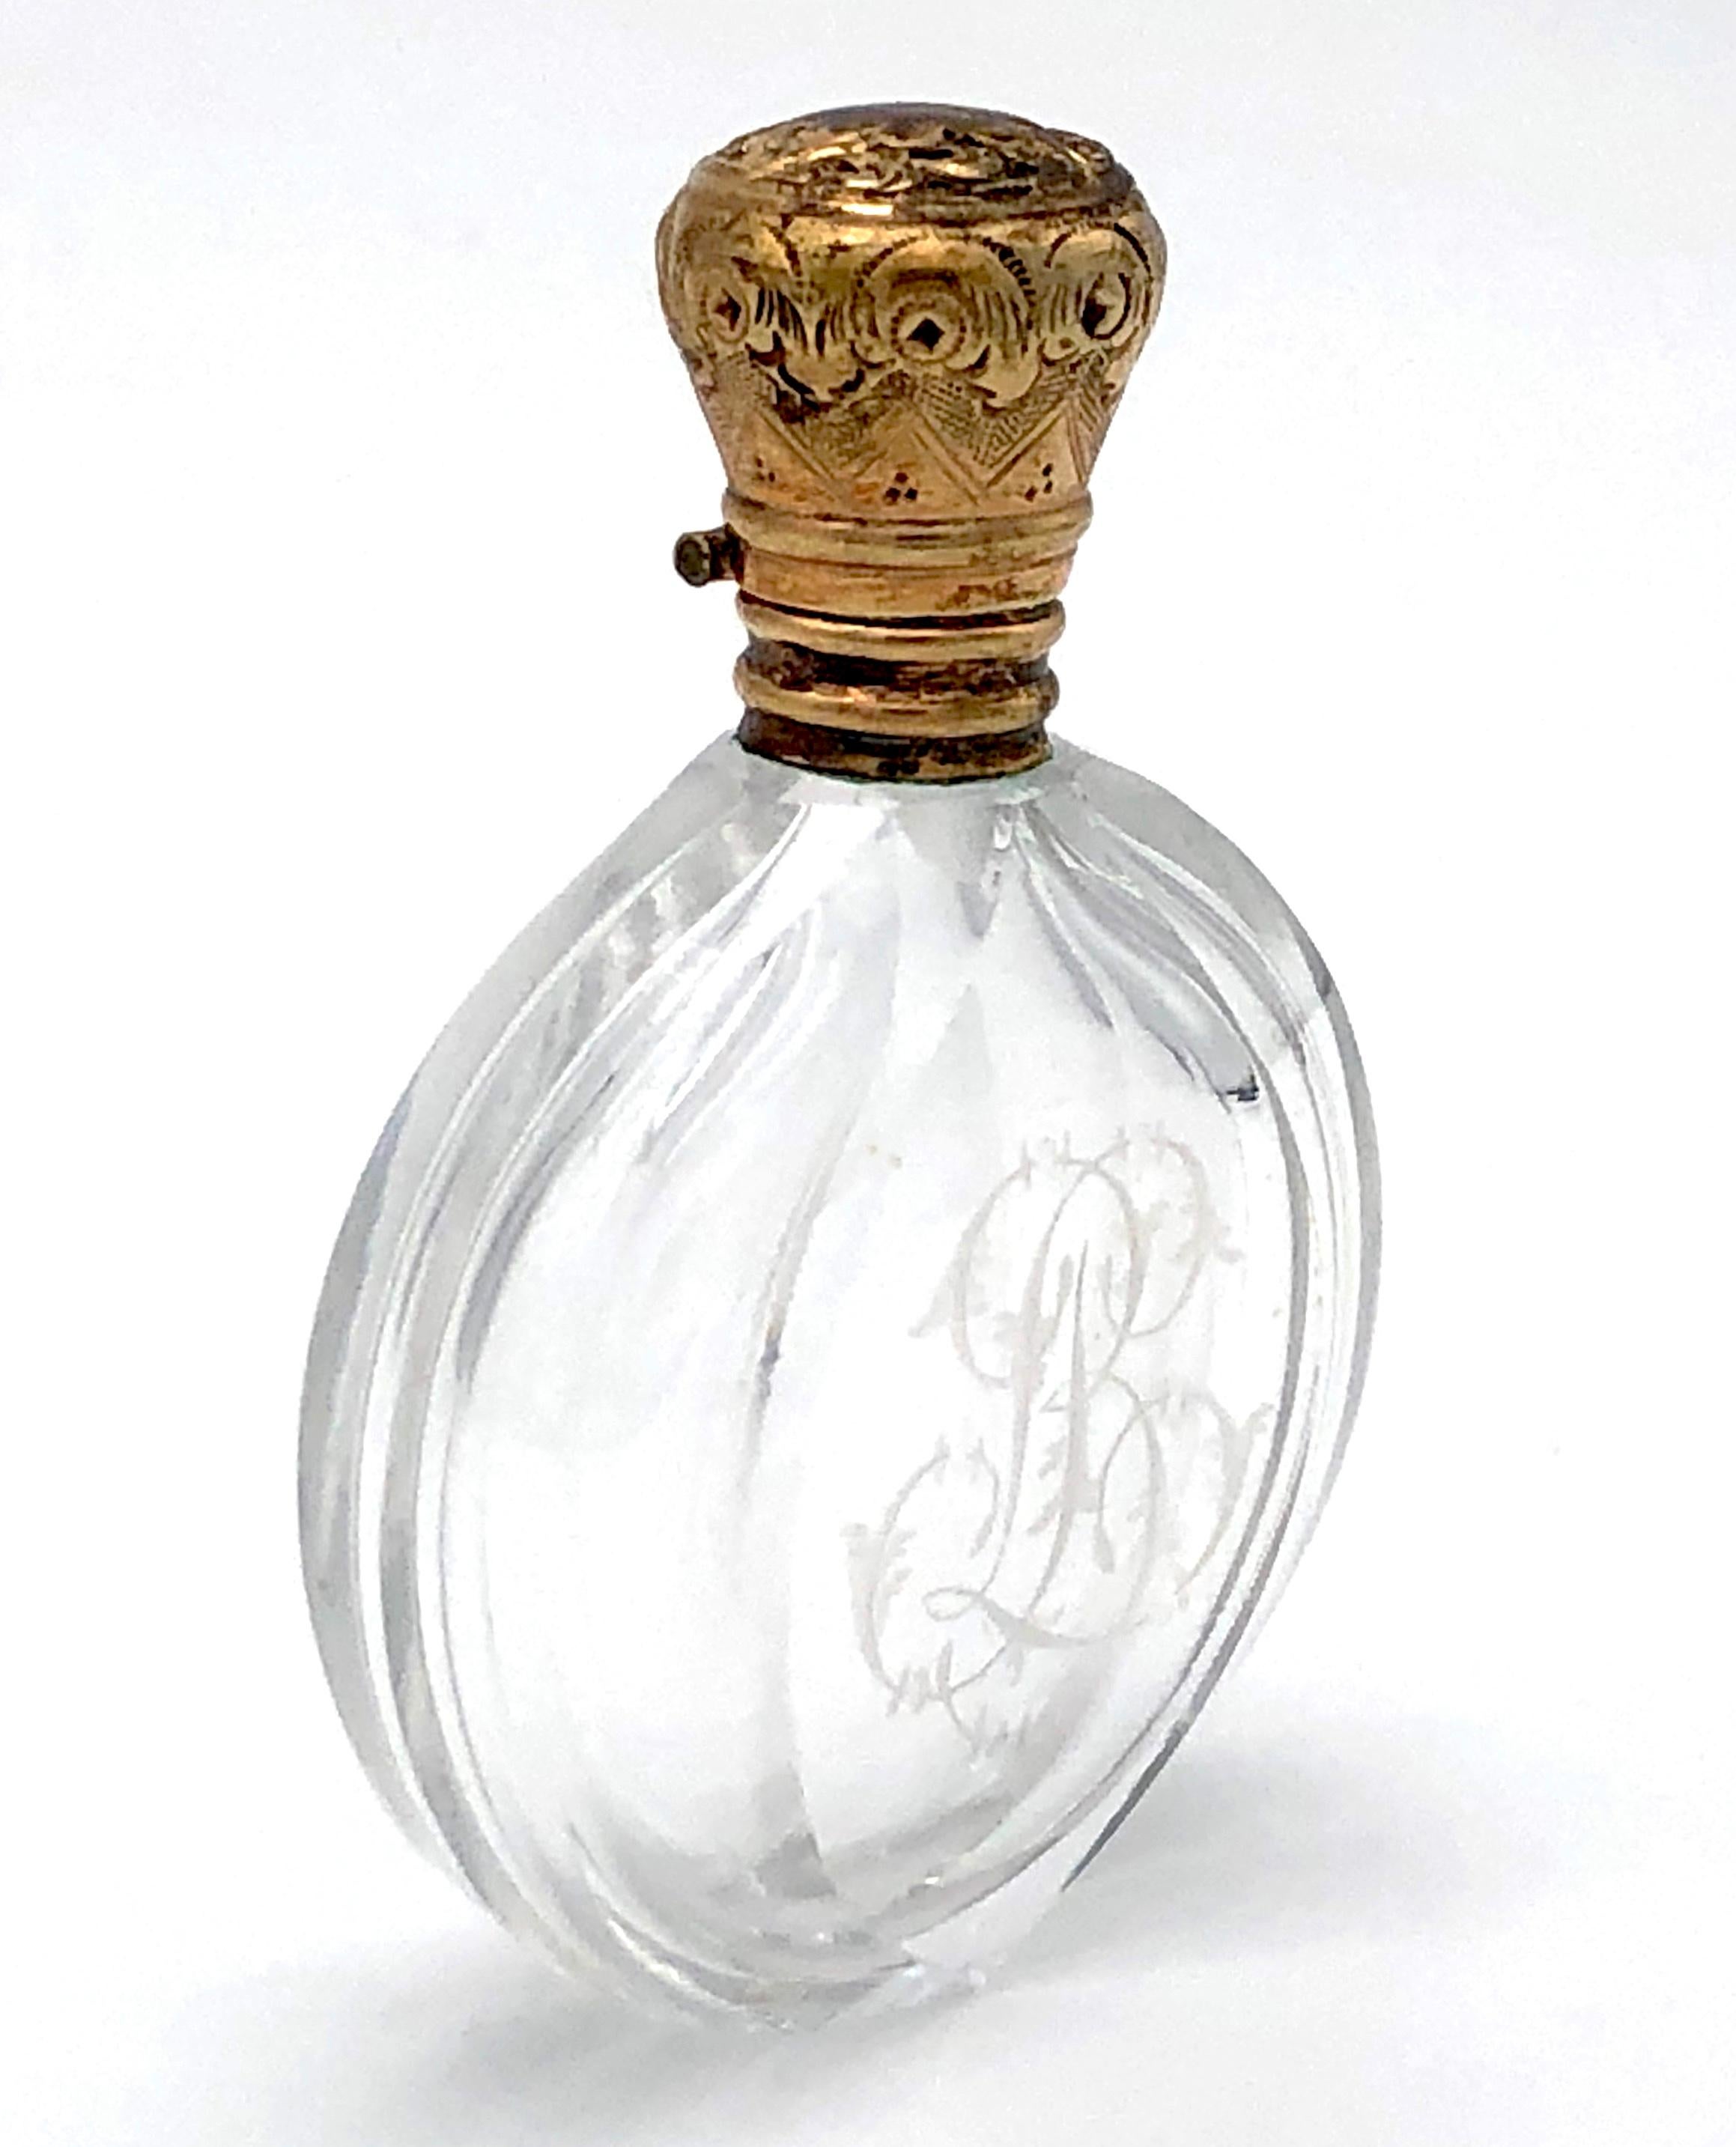 Charming and beautifully designed small gold mounted perfume bottle.
The exquisitely cut crystal bottle has the initial LB etched onto one side of the bottle .The opening of the bottle is covered with a ribbed gold mount and sealed of by a tiny 